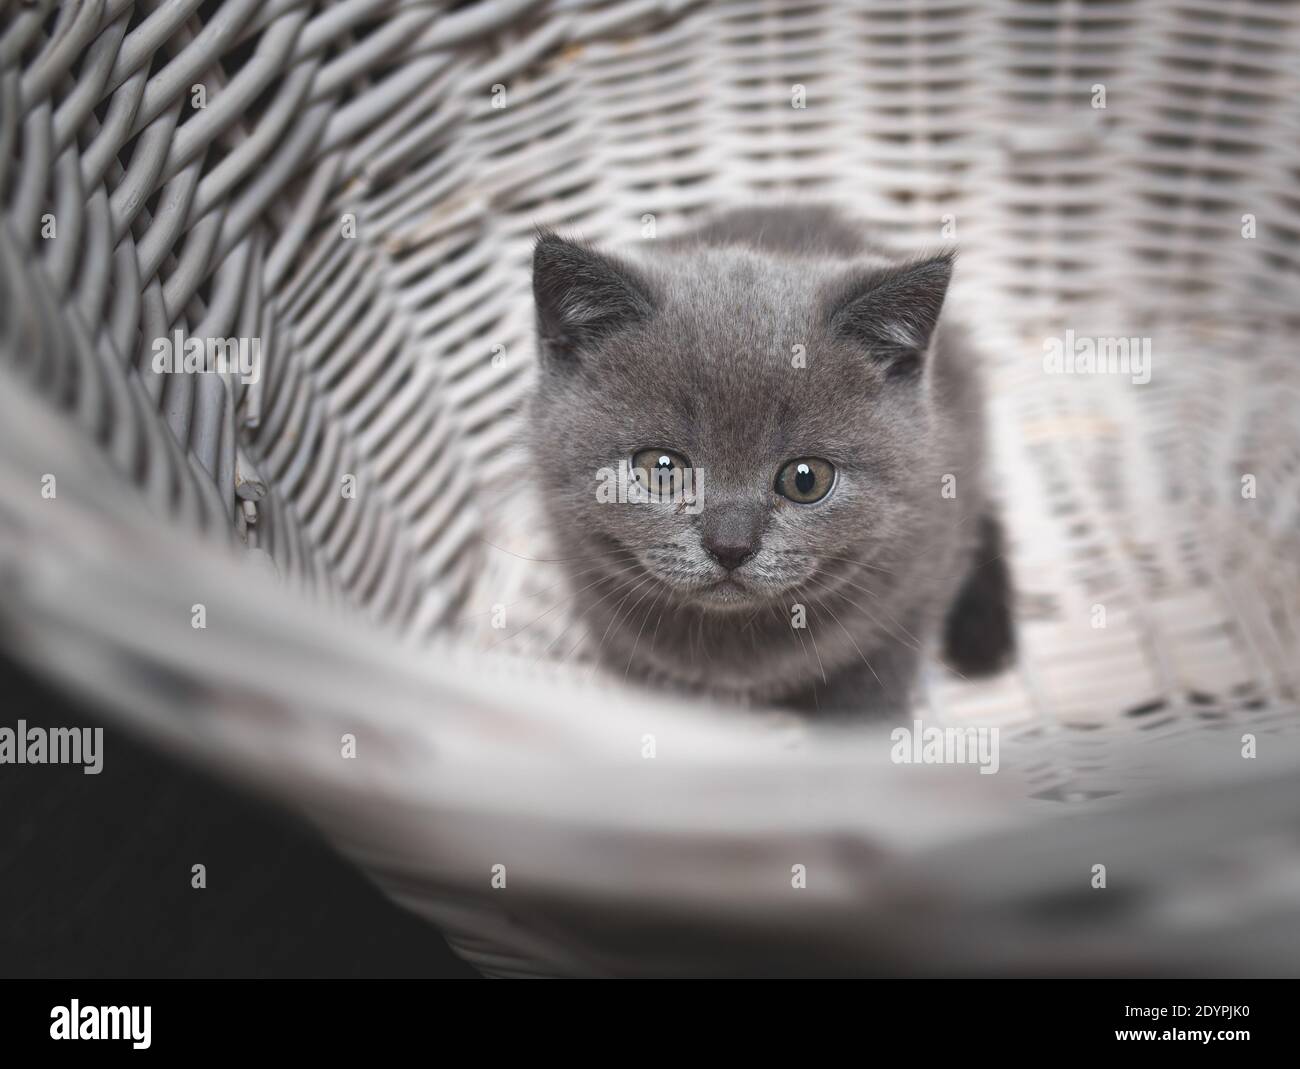 blue british shorthair kitten looking up in a white basket Stock Photo